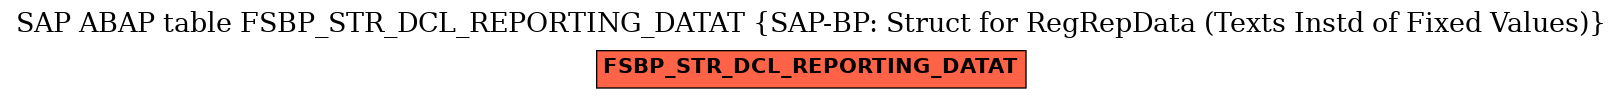 E-R Diagram for table FSBP_STR_DCL_REPORTING_DATAT (SAP-BP: Struct for RegRepData (Texts Instd of Fixed Values))